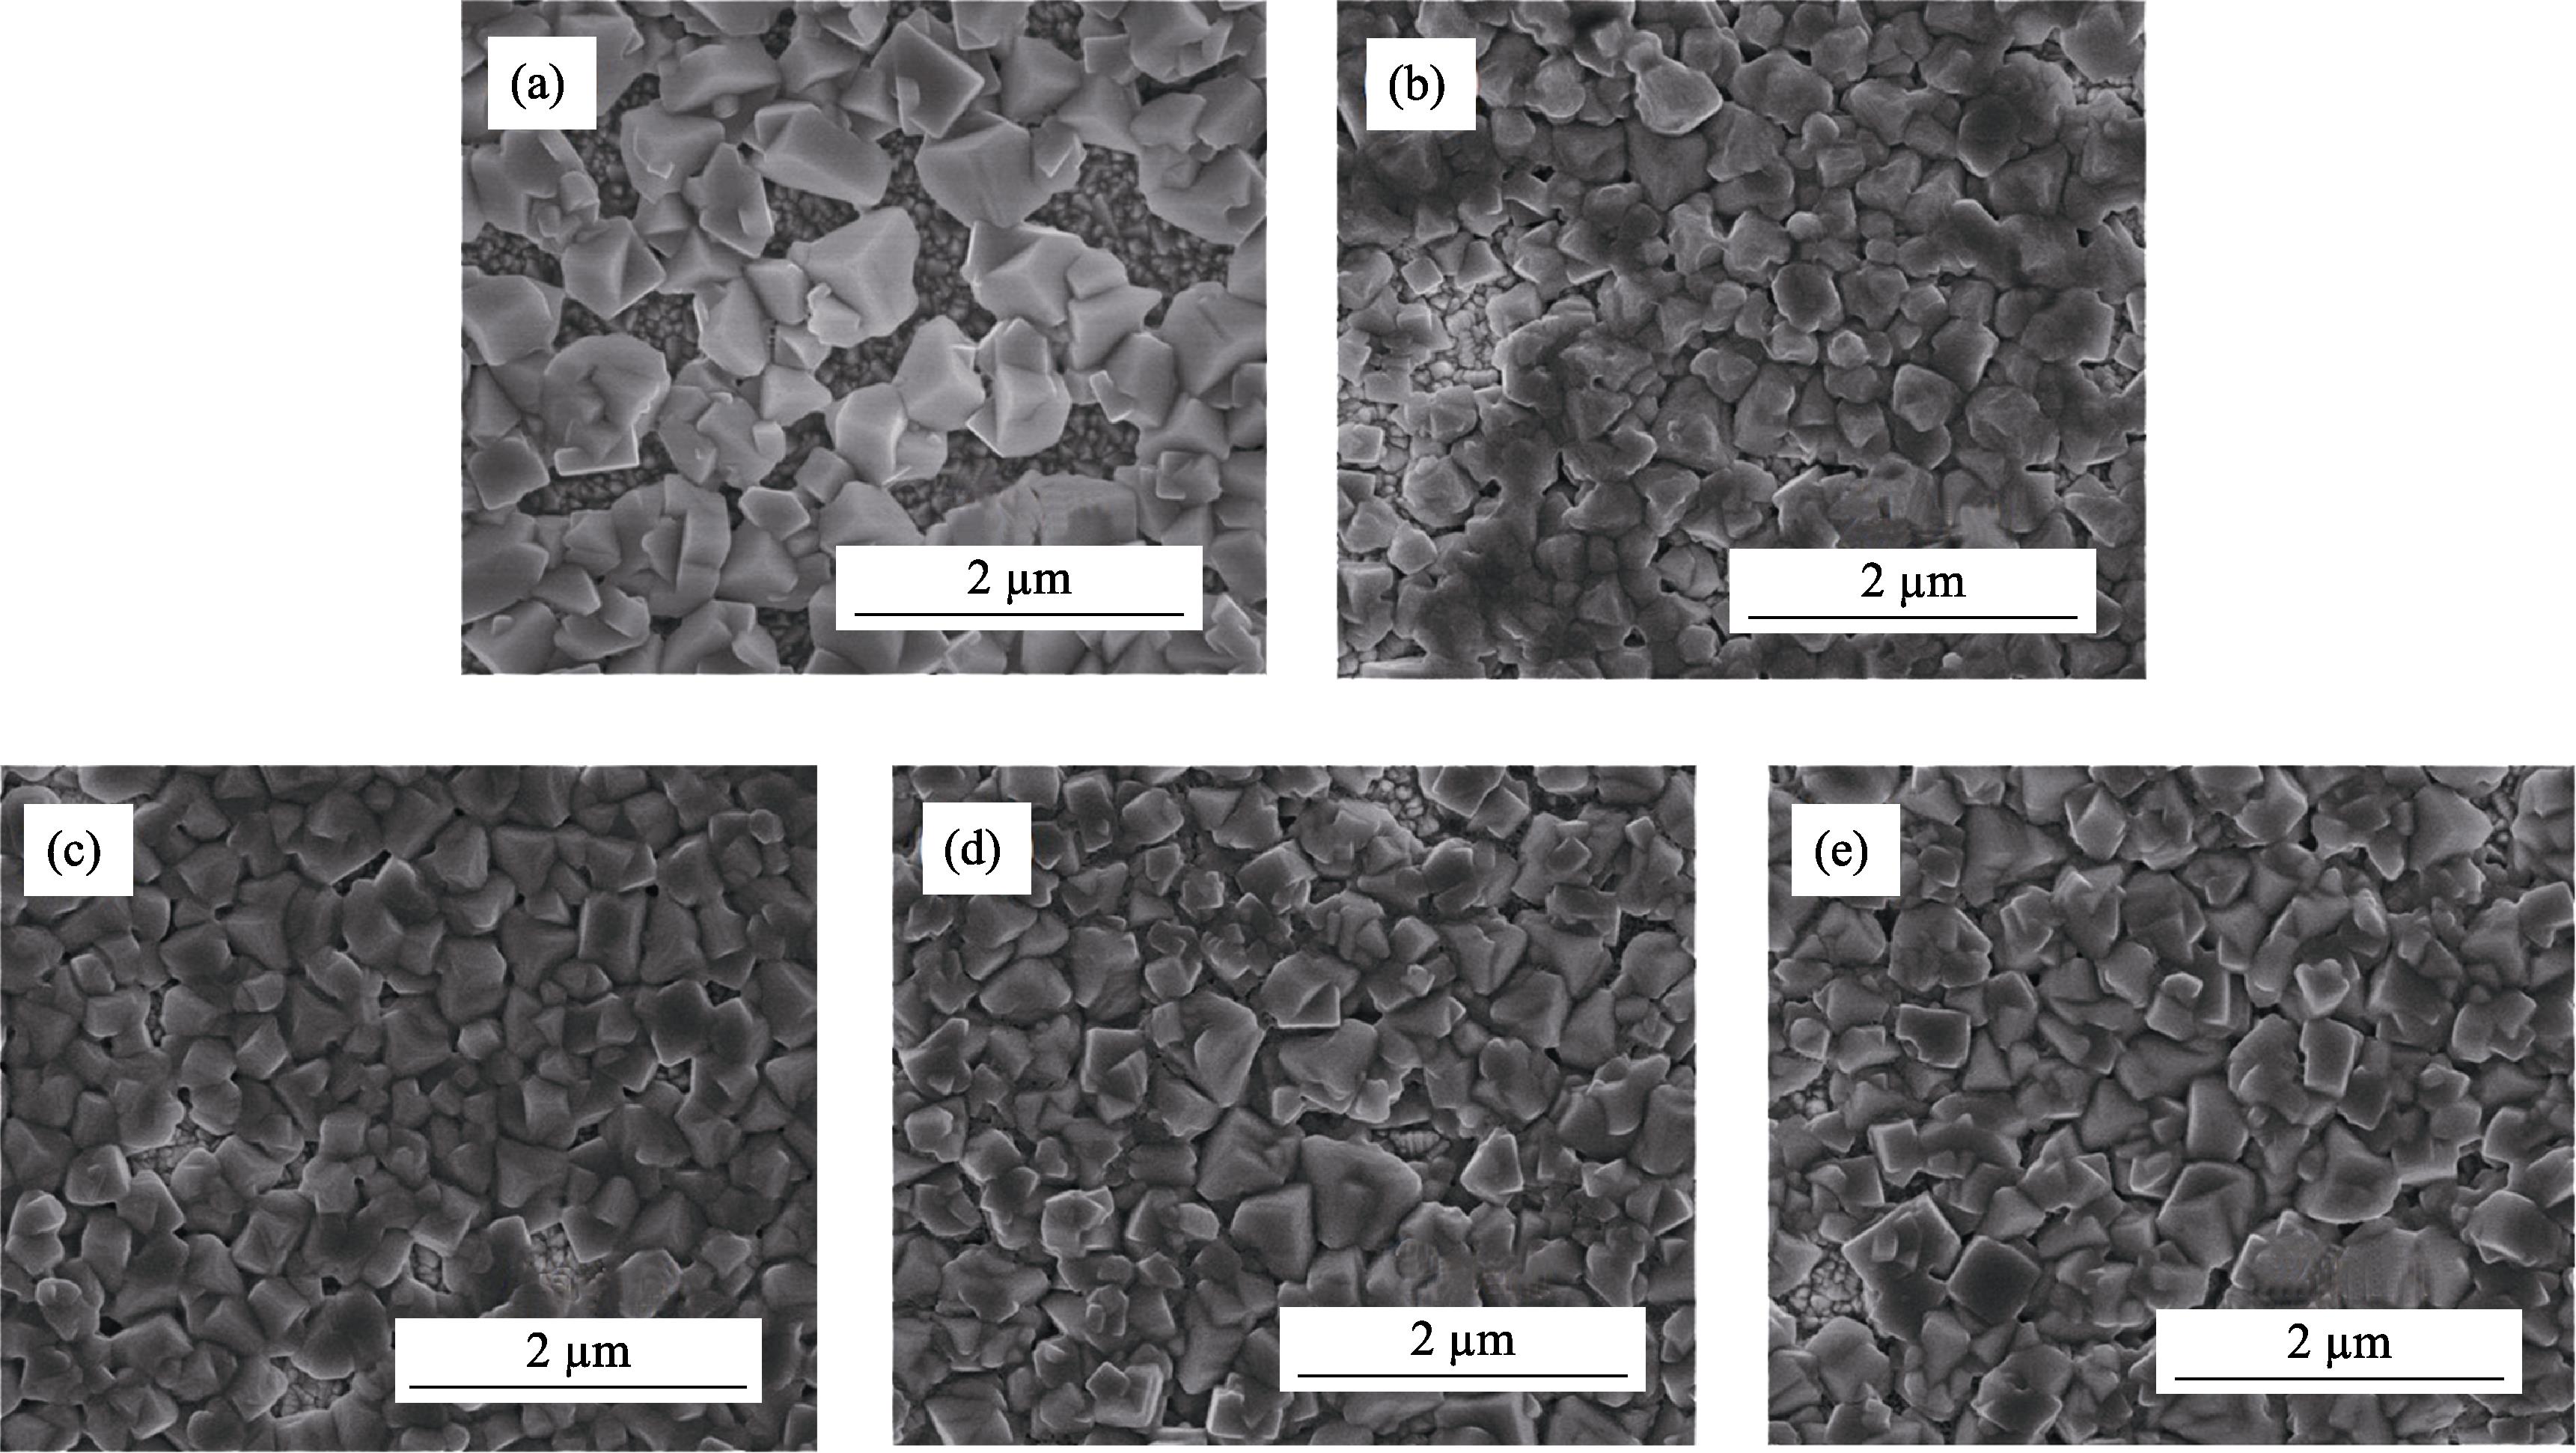 Surface SEM images of perovskite films with various concentration of PVP (a) Without PVP; (b) 0.2wt% PVP; (c) 0.4wt% PVP; (d) 0.6wt% PVP; (e) 0.8wt% PVP